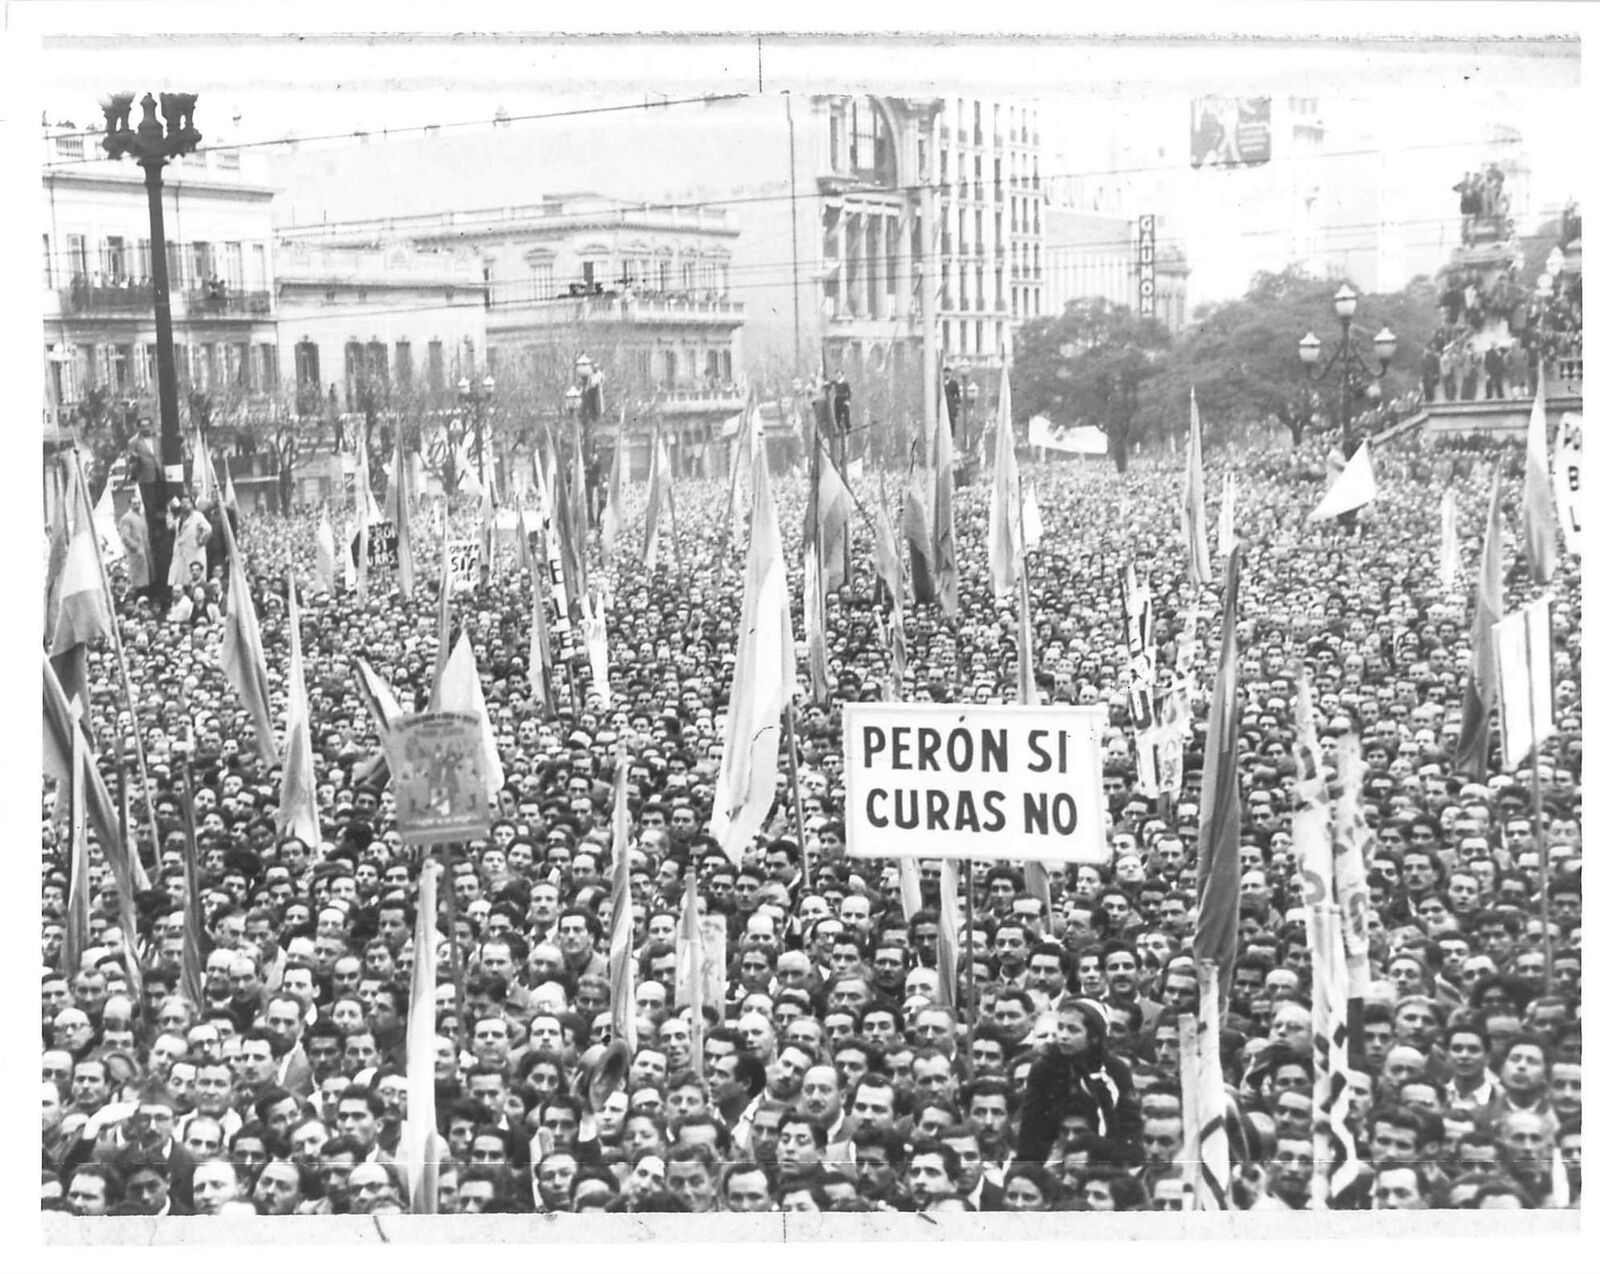 1955 Press Photo Buenos Aires Pro PERON Demonstration Protest March No Curas kg